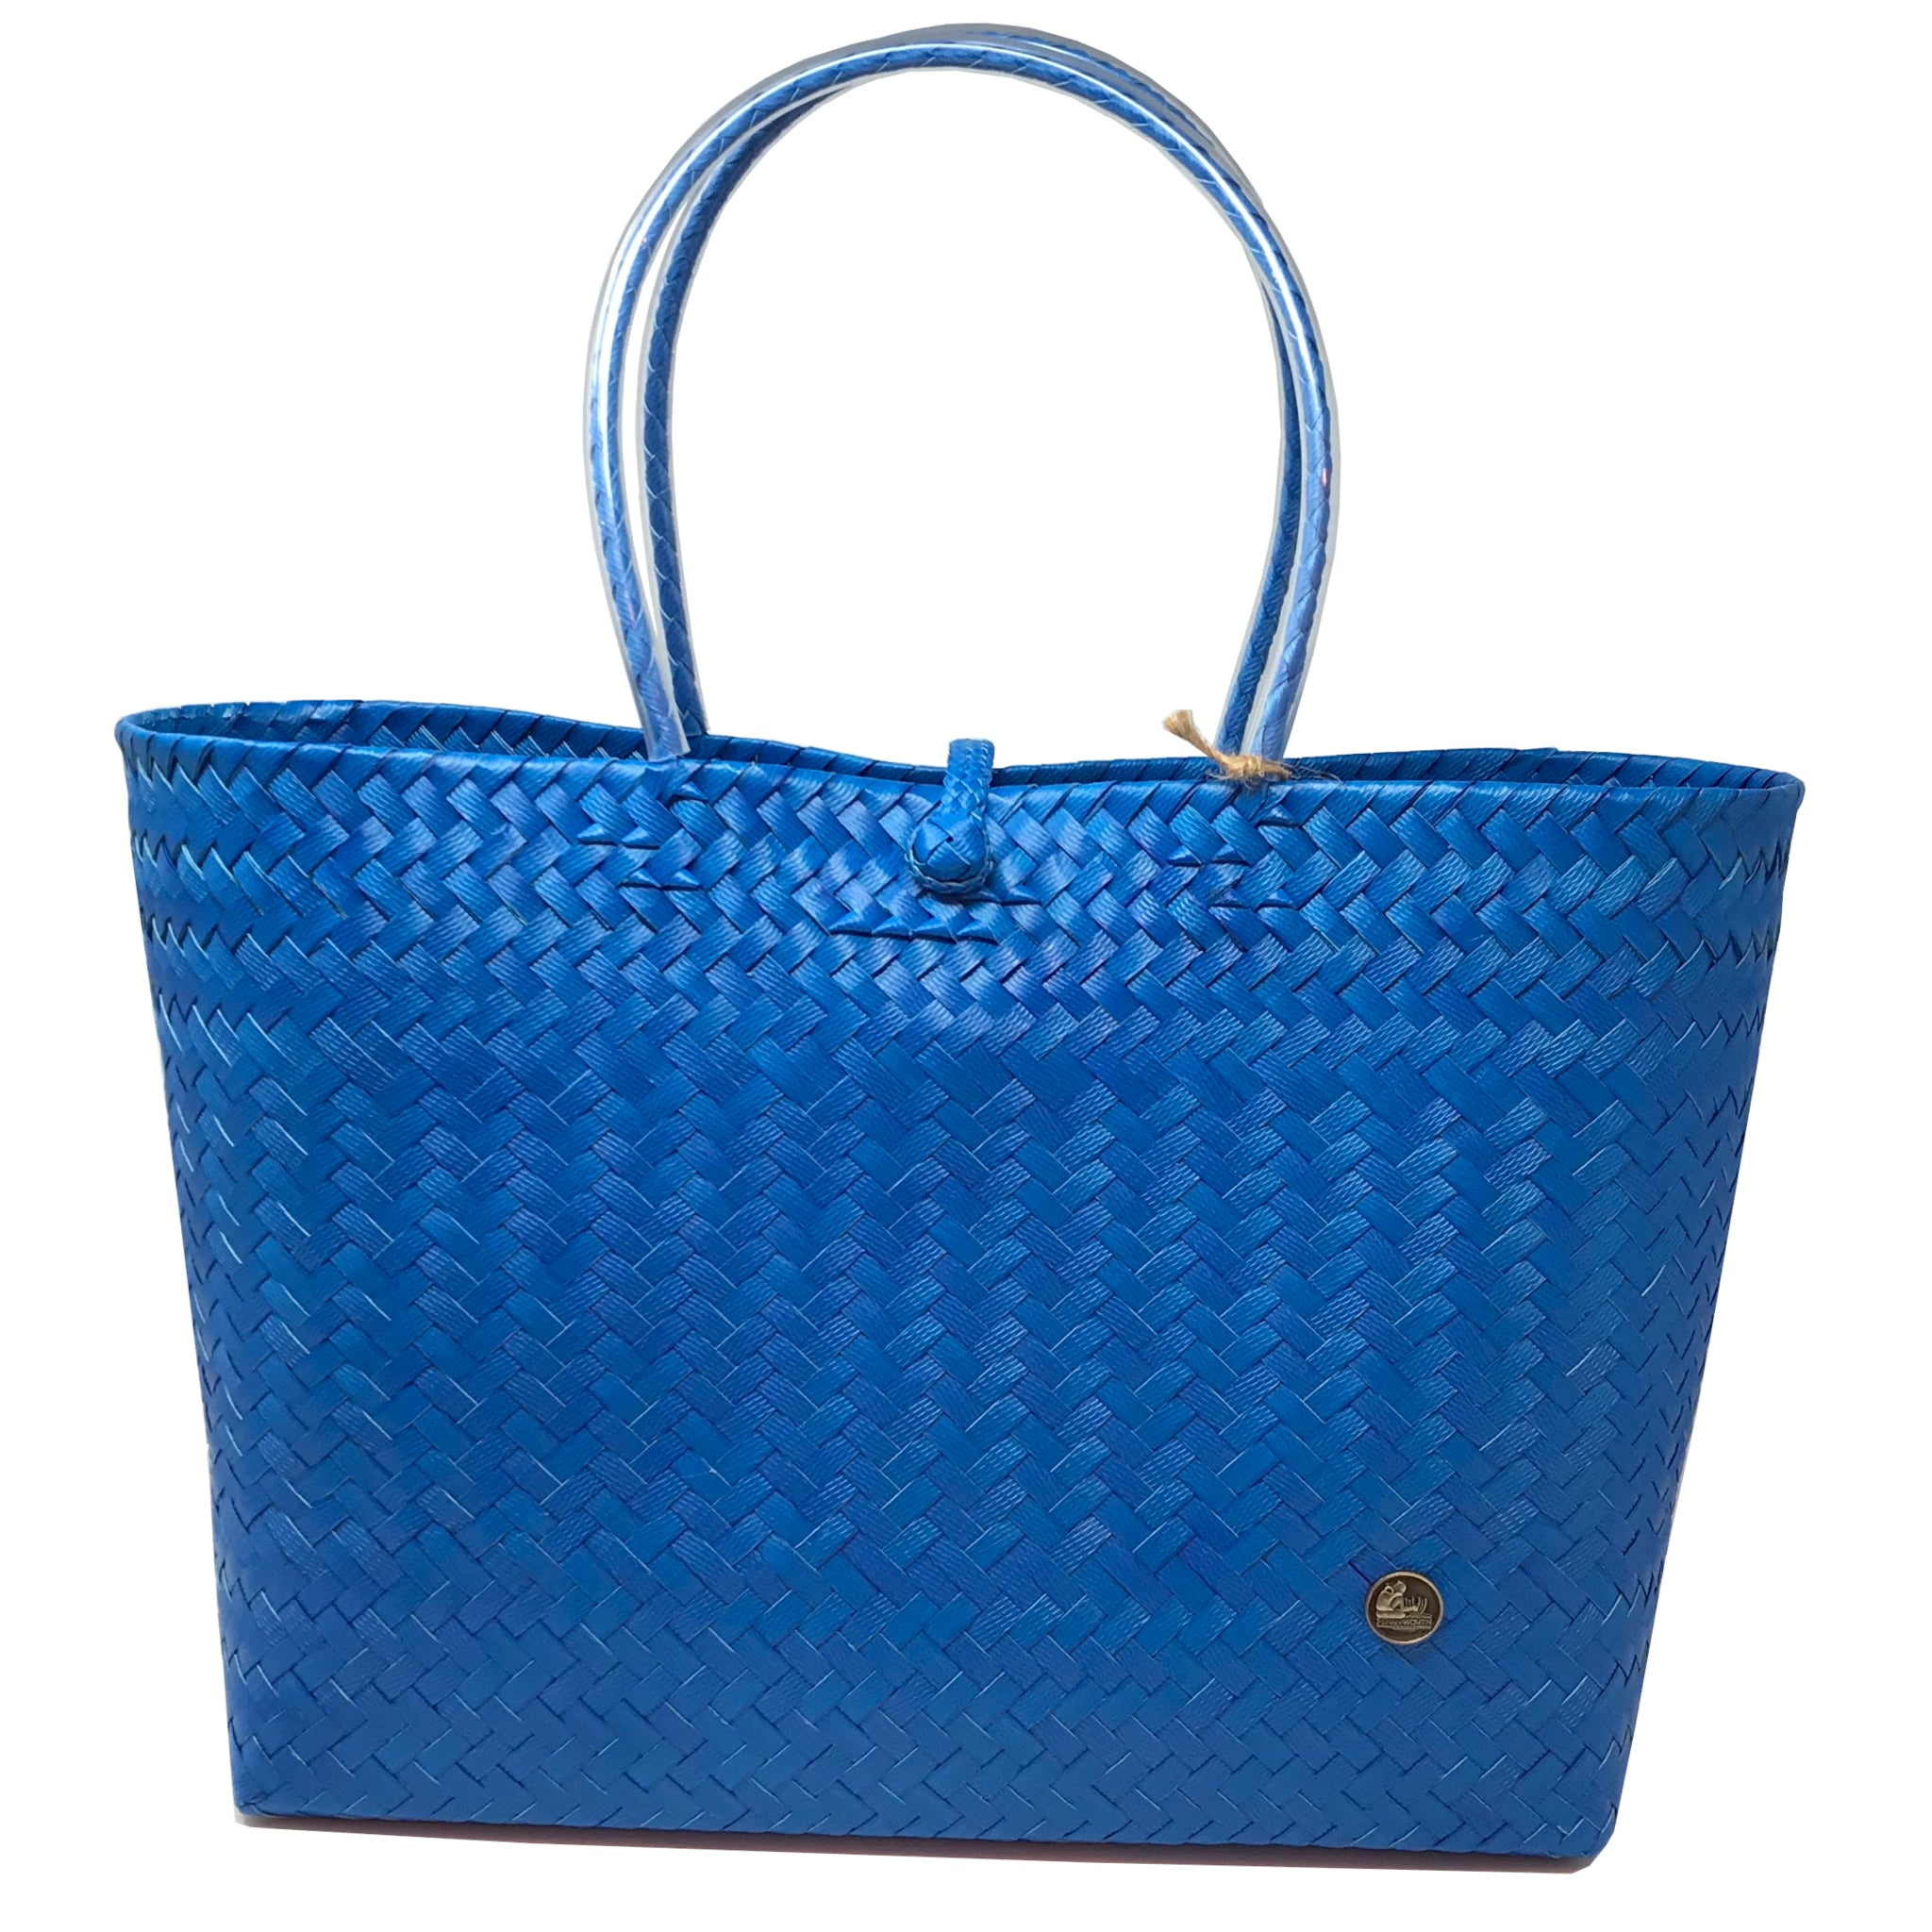 Everyday Tote Bag - Blue